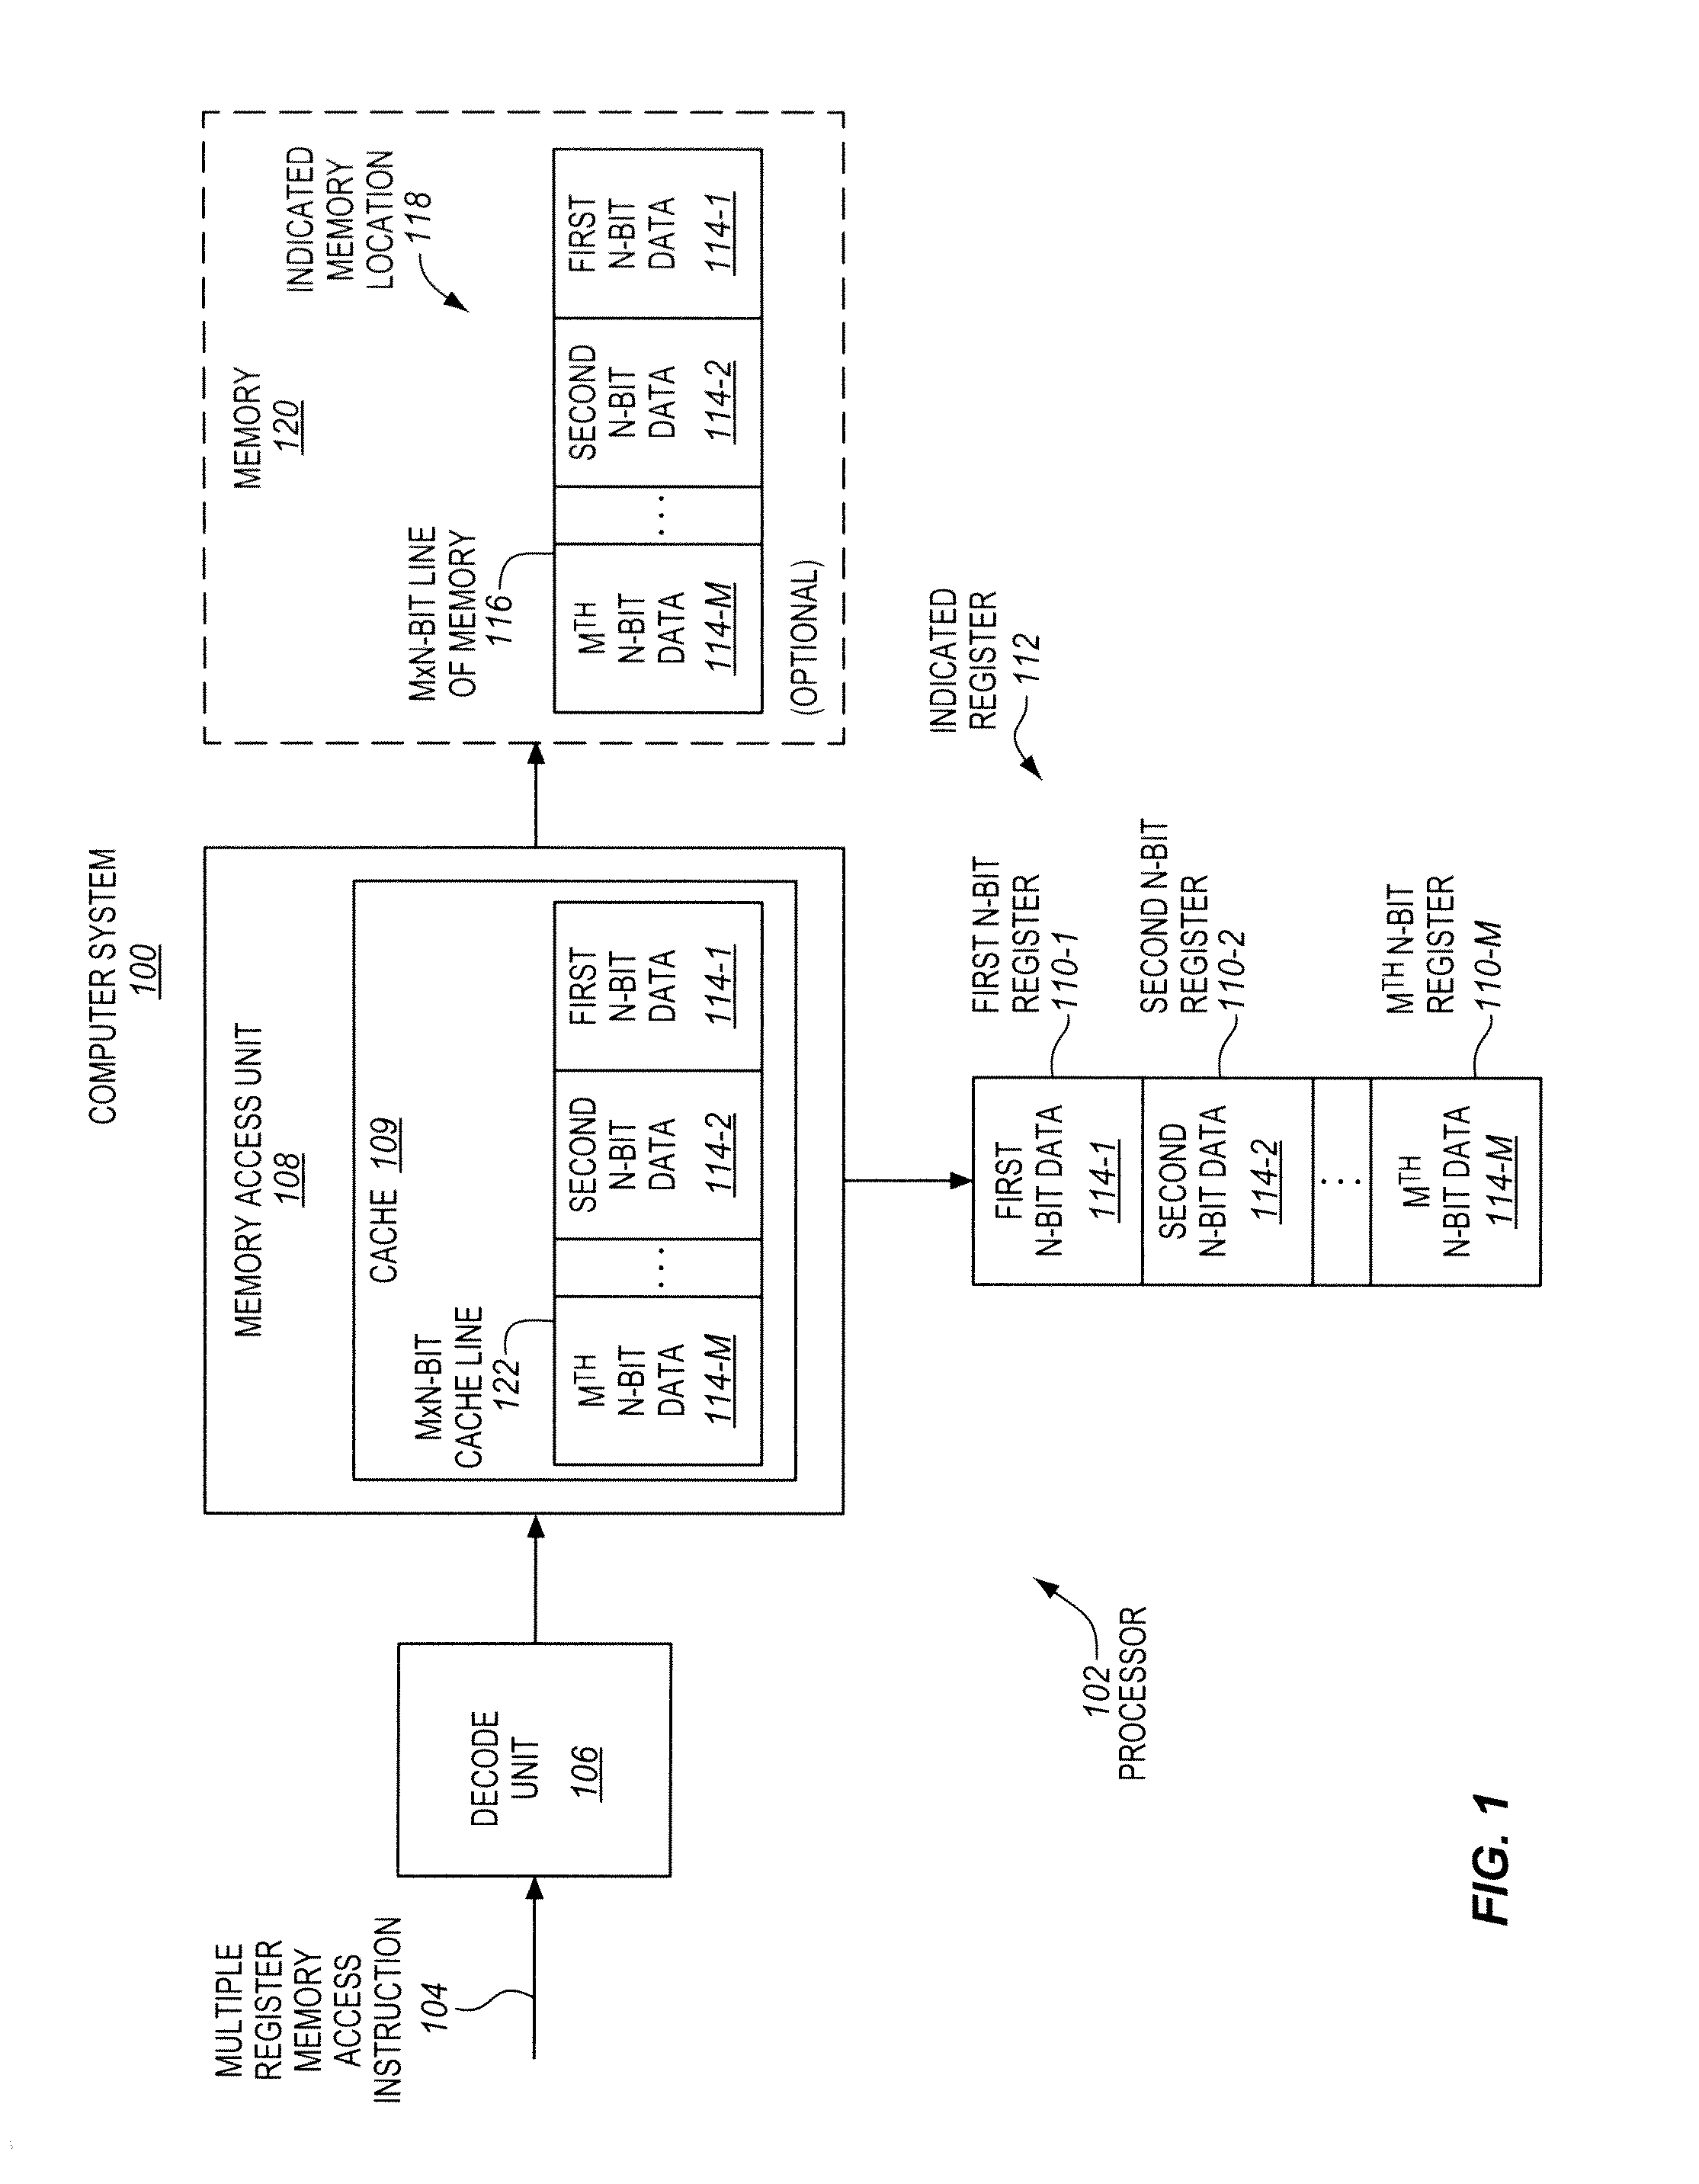 Multiple register memory access instructions, processors, methods, and systems